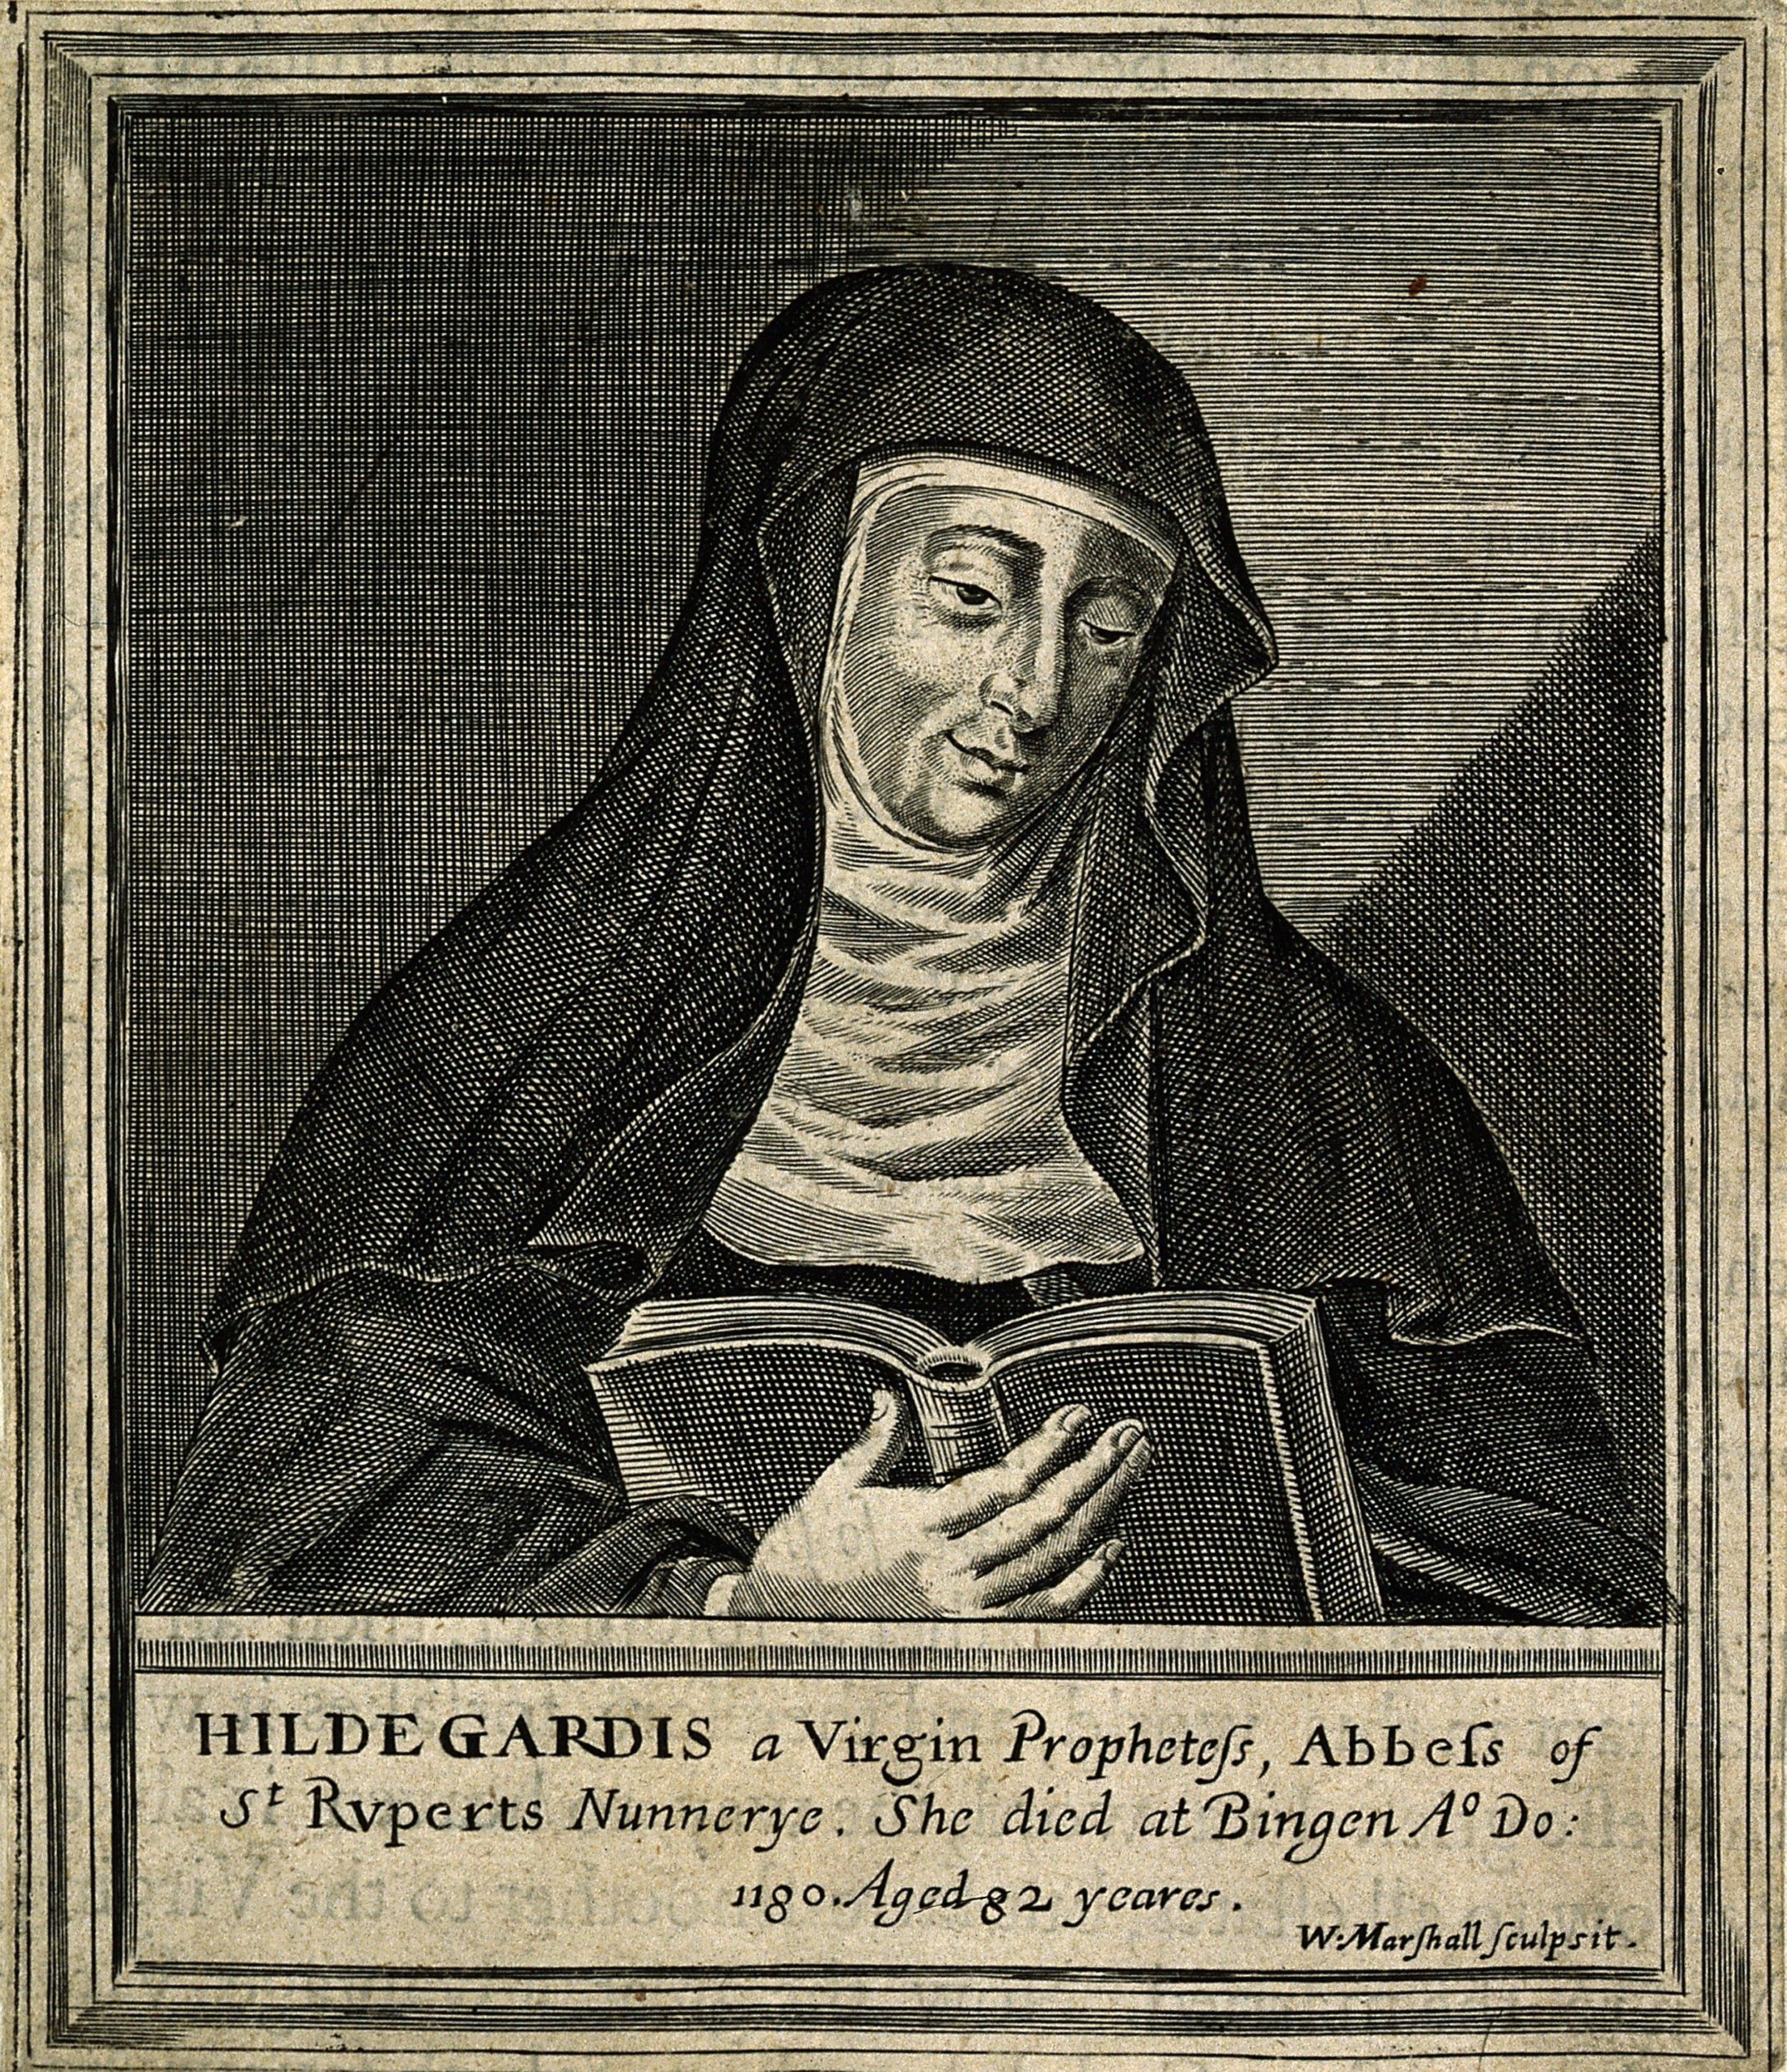 A 17th-century line engraving of Hildegard.